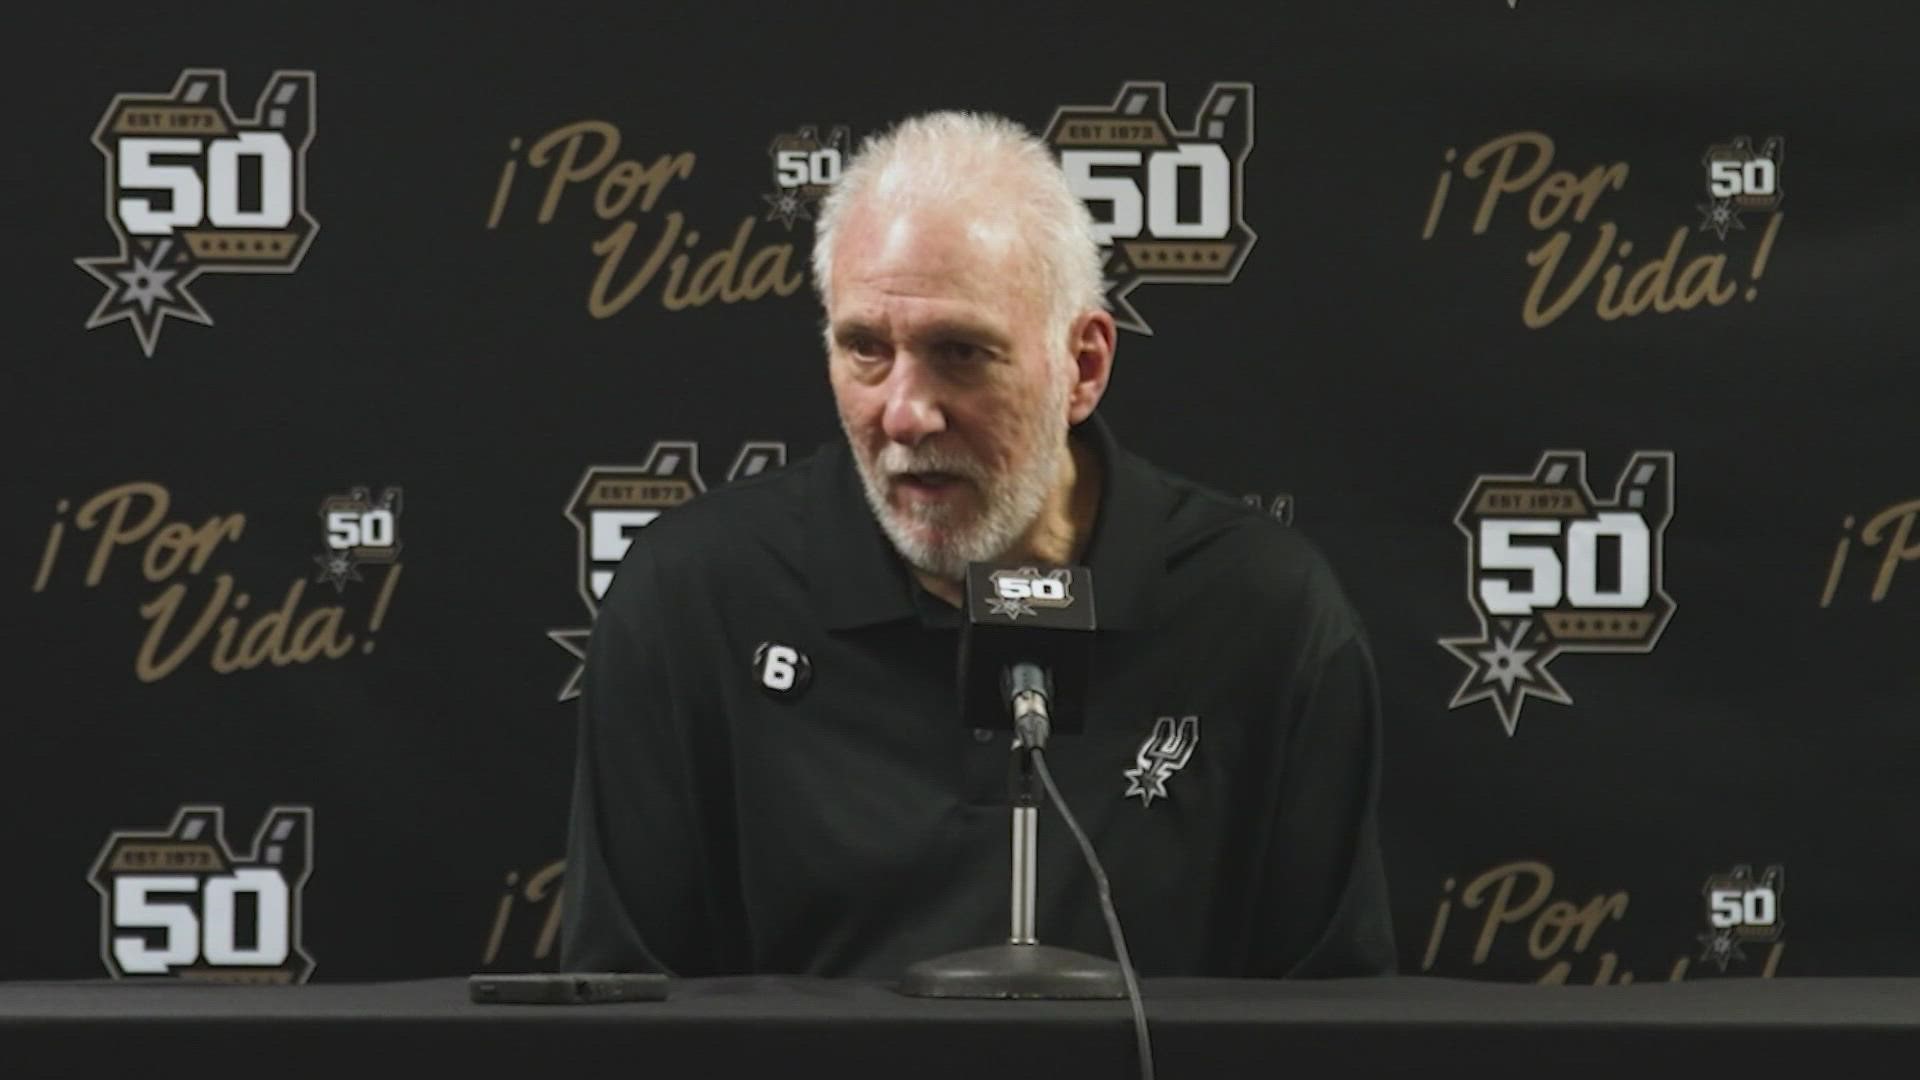 "Anybody that has observed the Spurs over a very long period of time knows that an accusation like this would be taken very seriously," Popovich said in part.